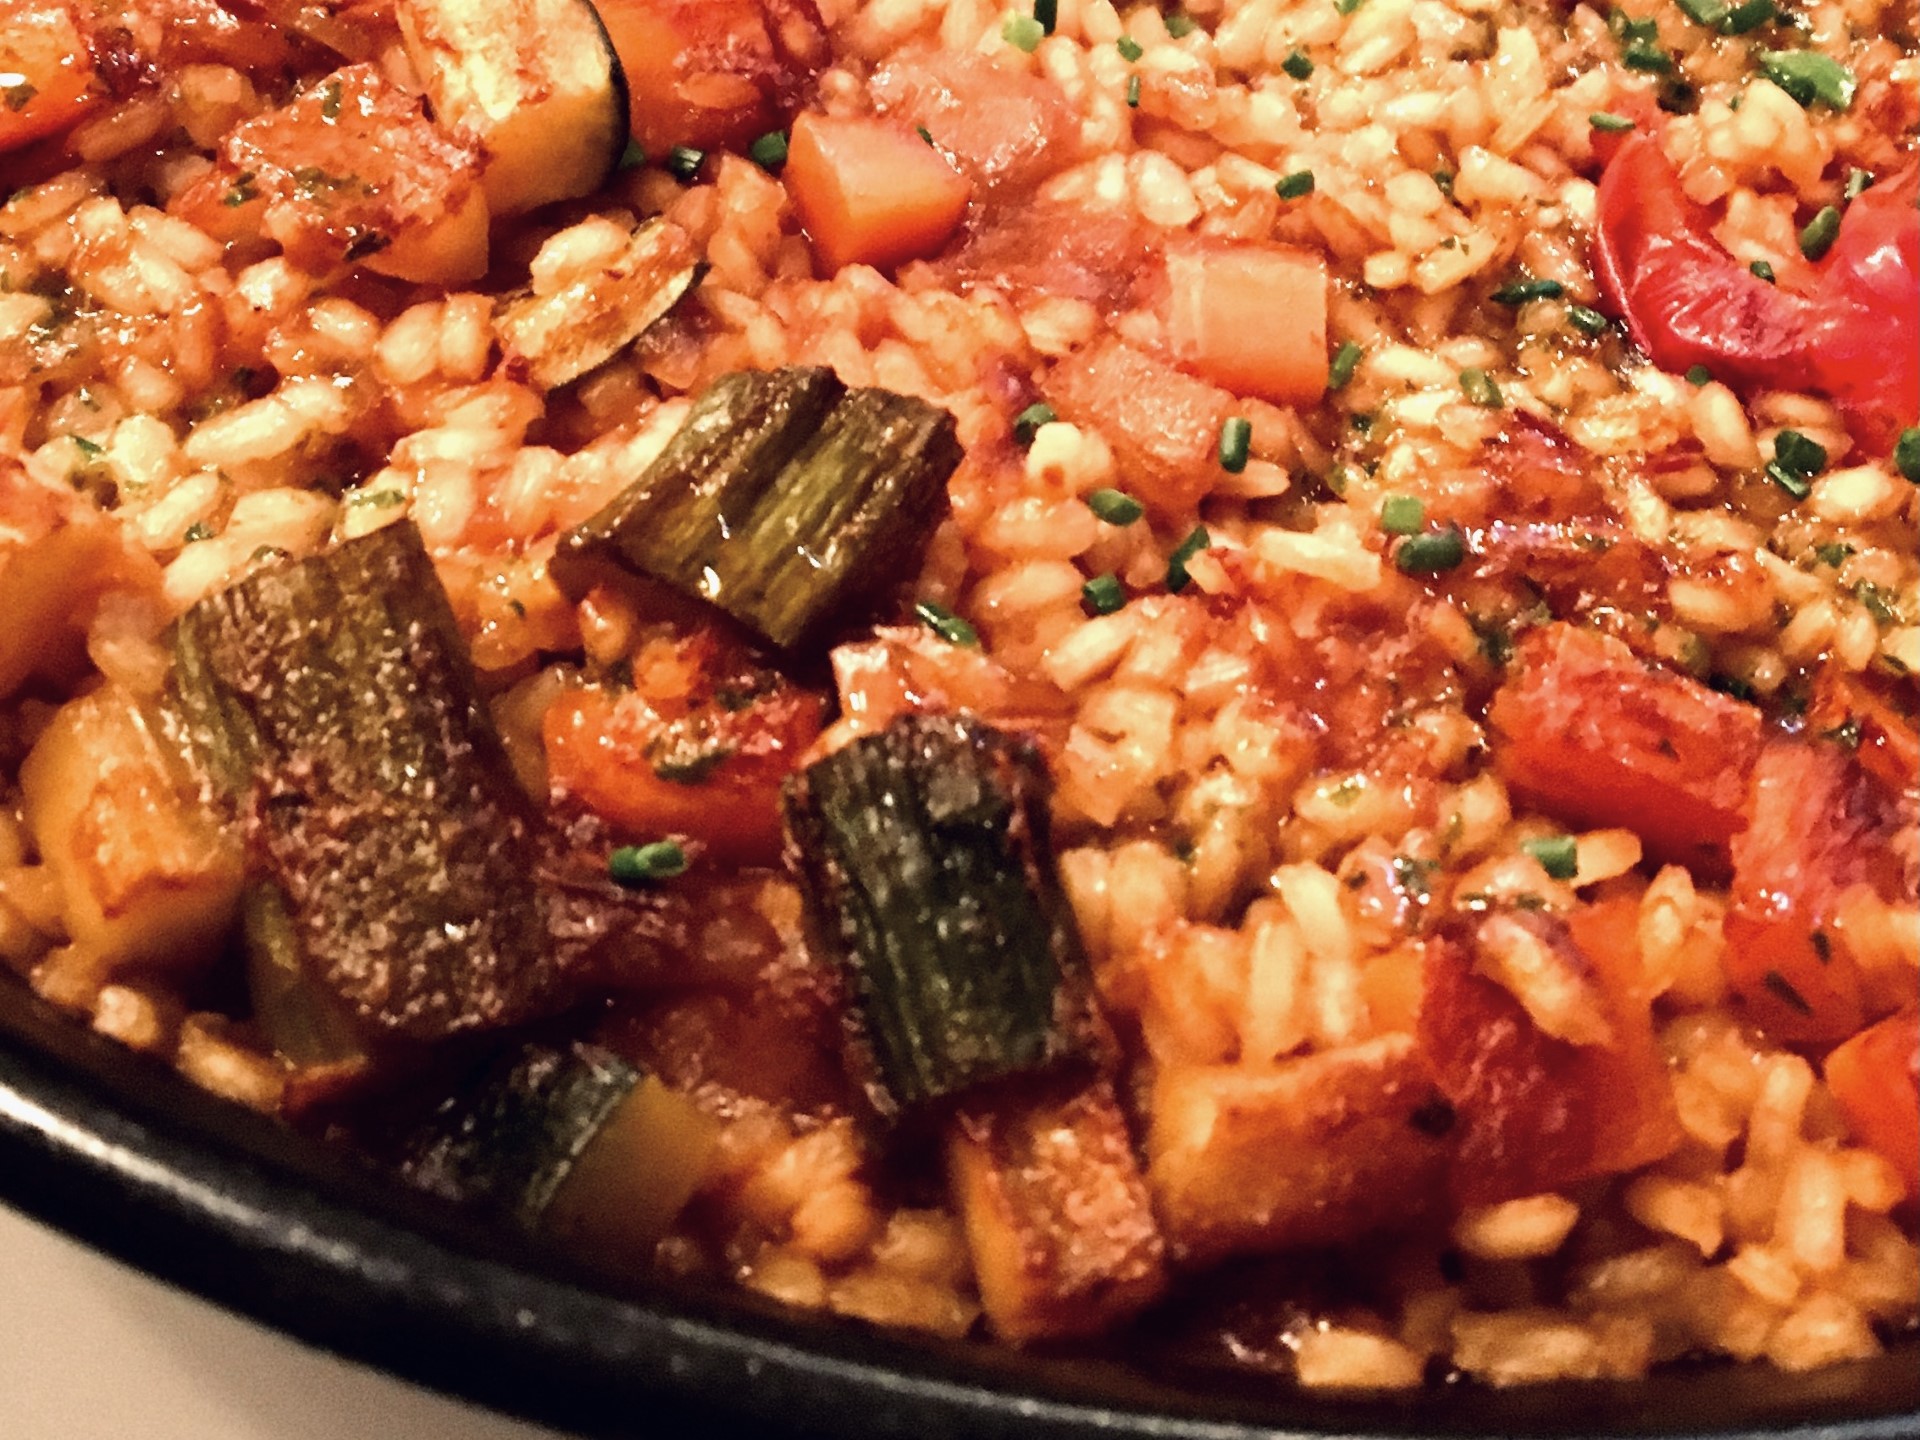 Vegan paella is one example of typically Spanish vegan dishes that you will find easily. If not on the menu, just ask!